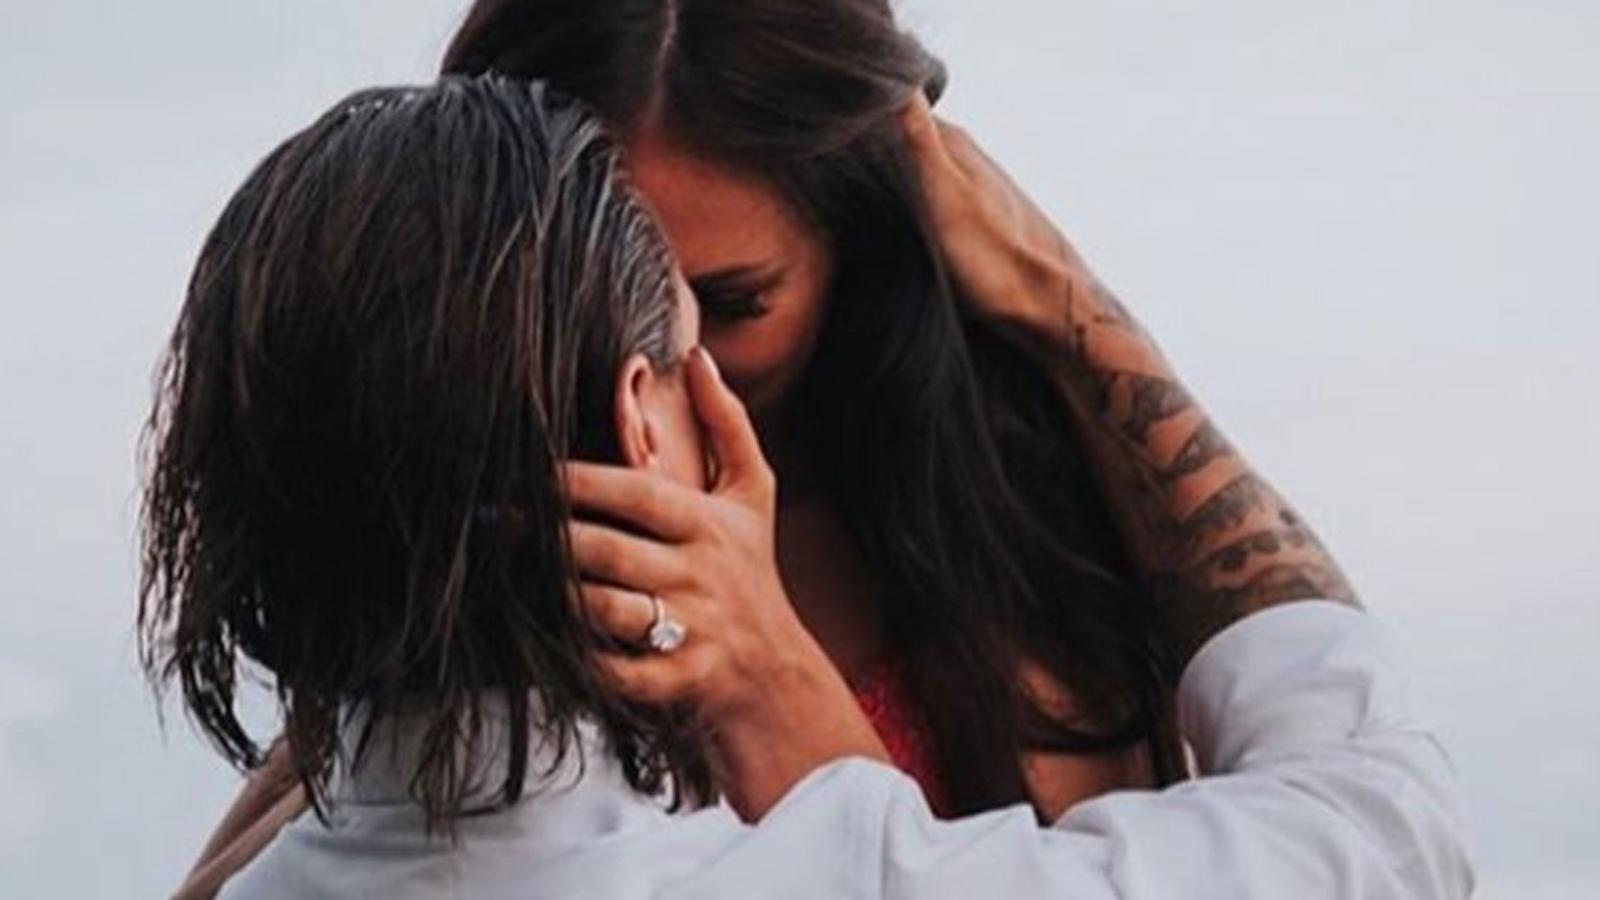 Erik Karlsson posted more photos of his absolutely stunning wife!